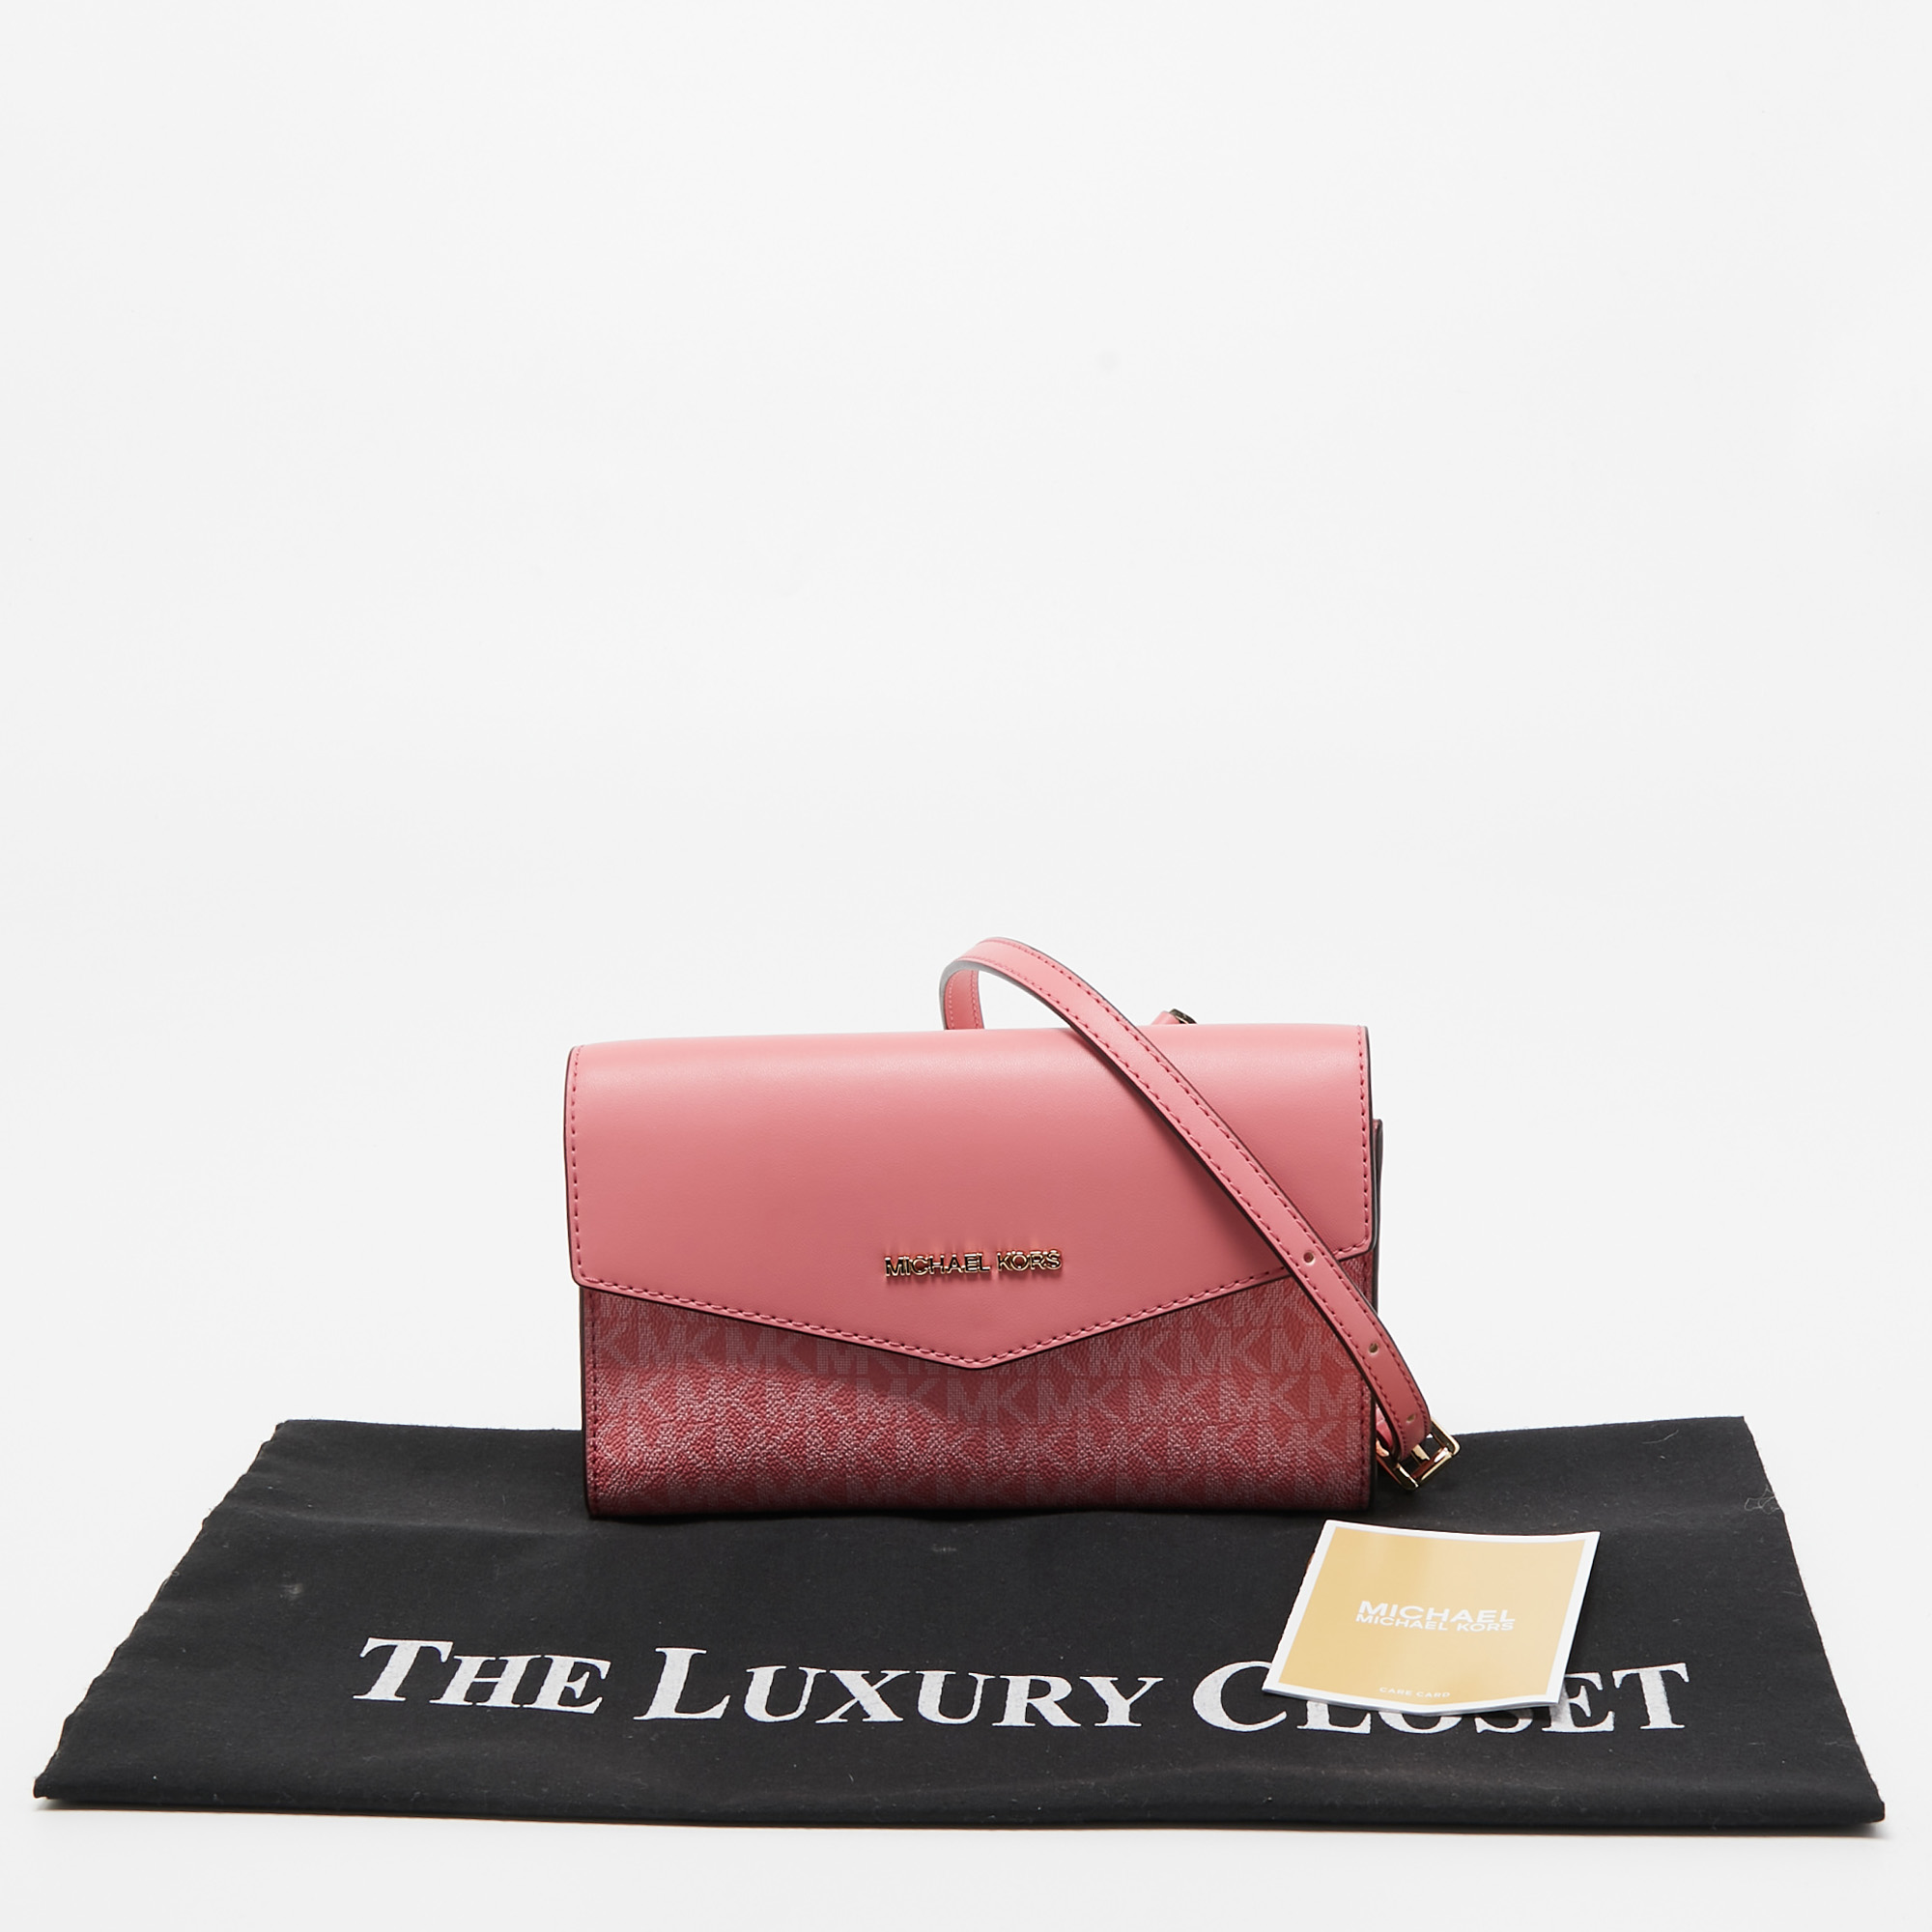 Michael Kors Pink Signature Coated Canvas And Leather Envelope Flap Clutch Bag